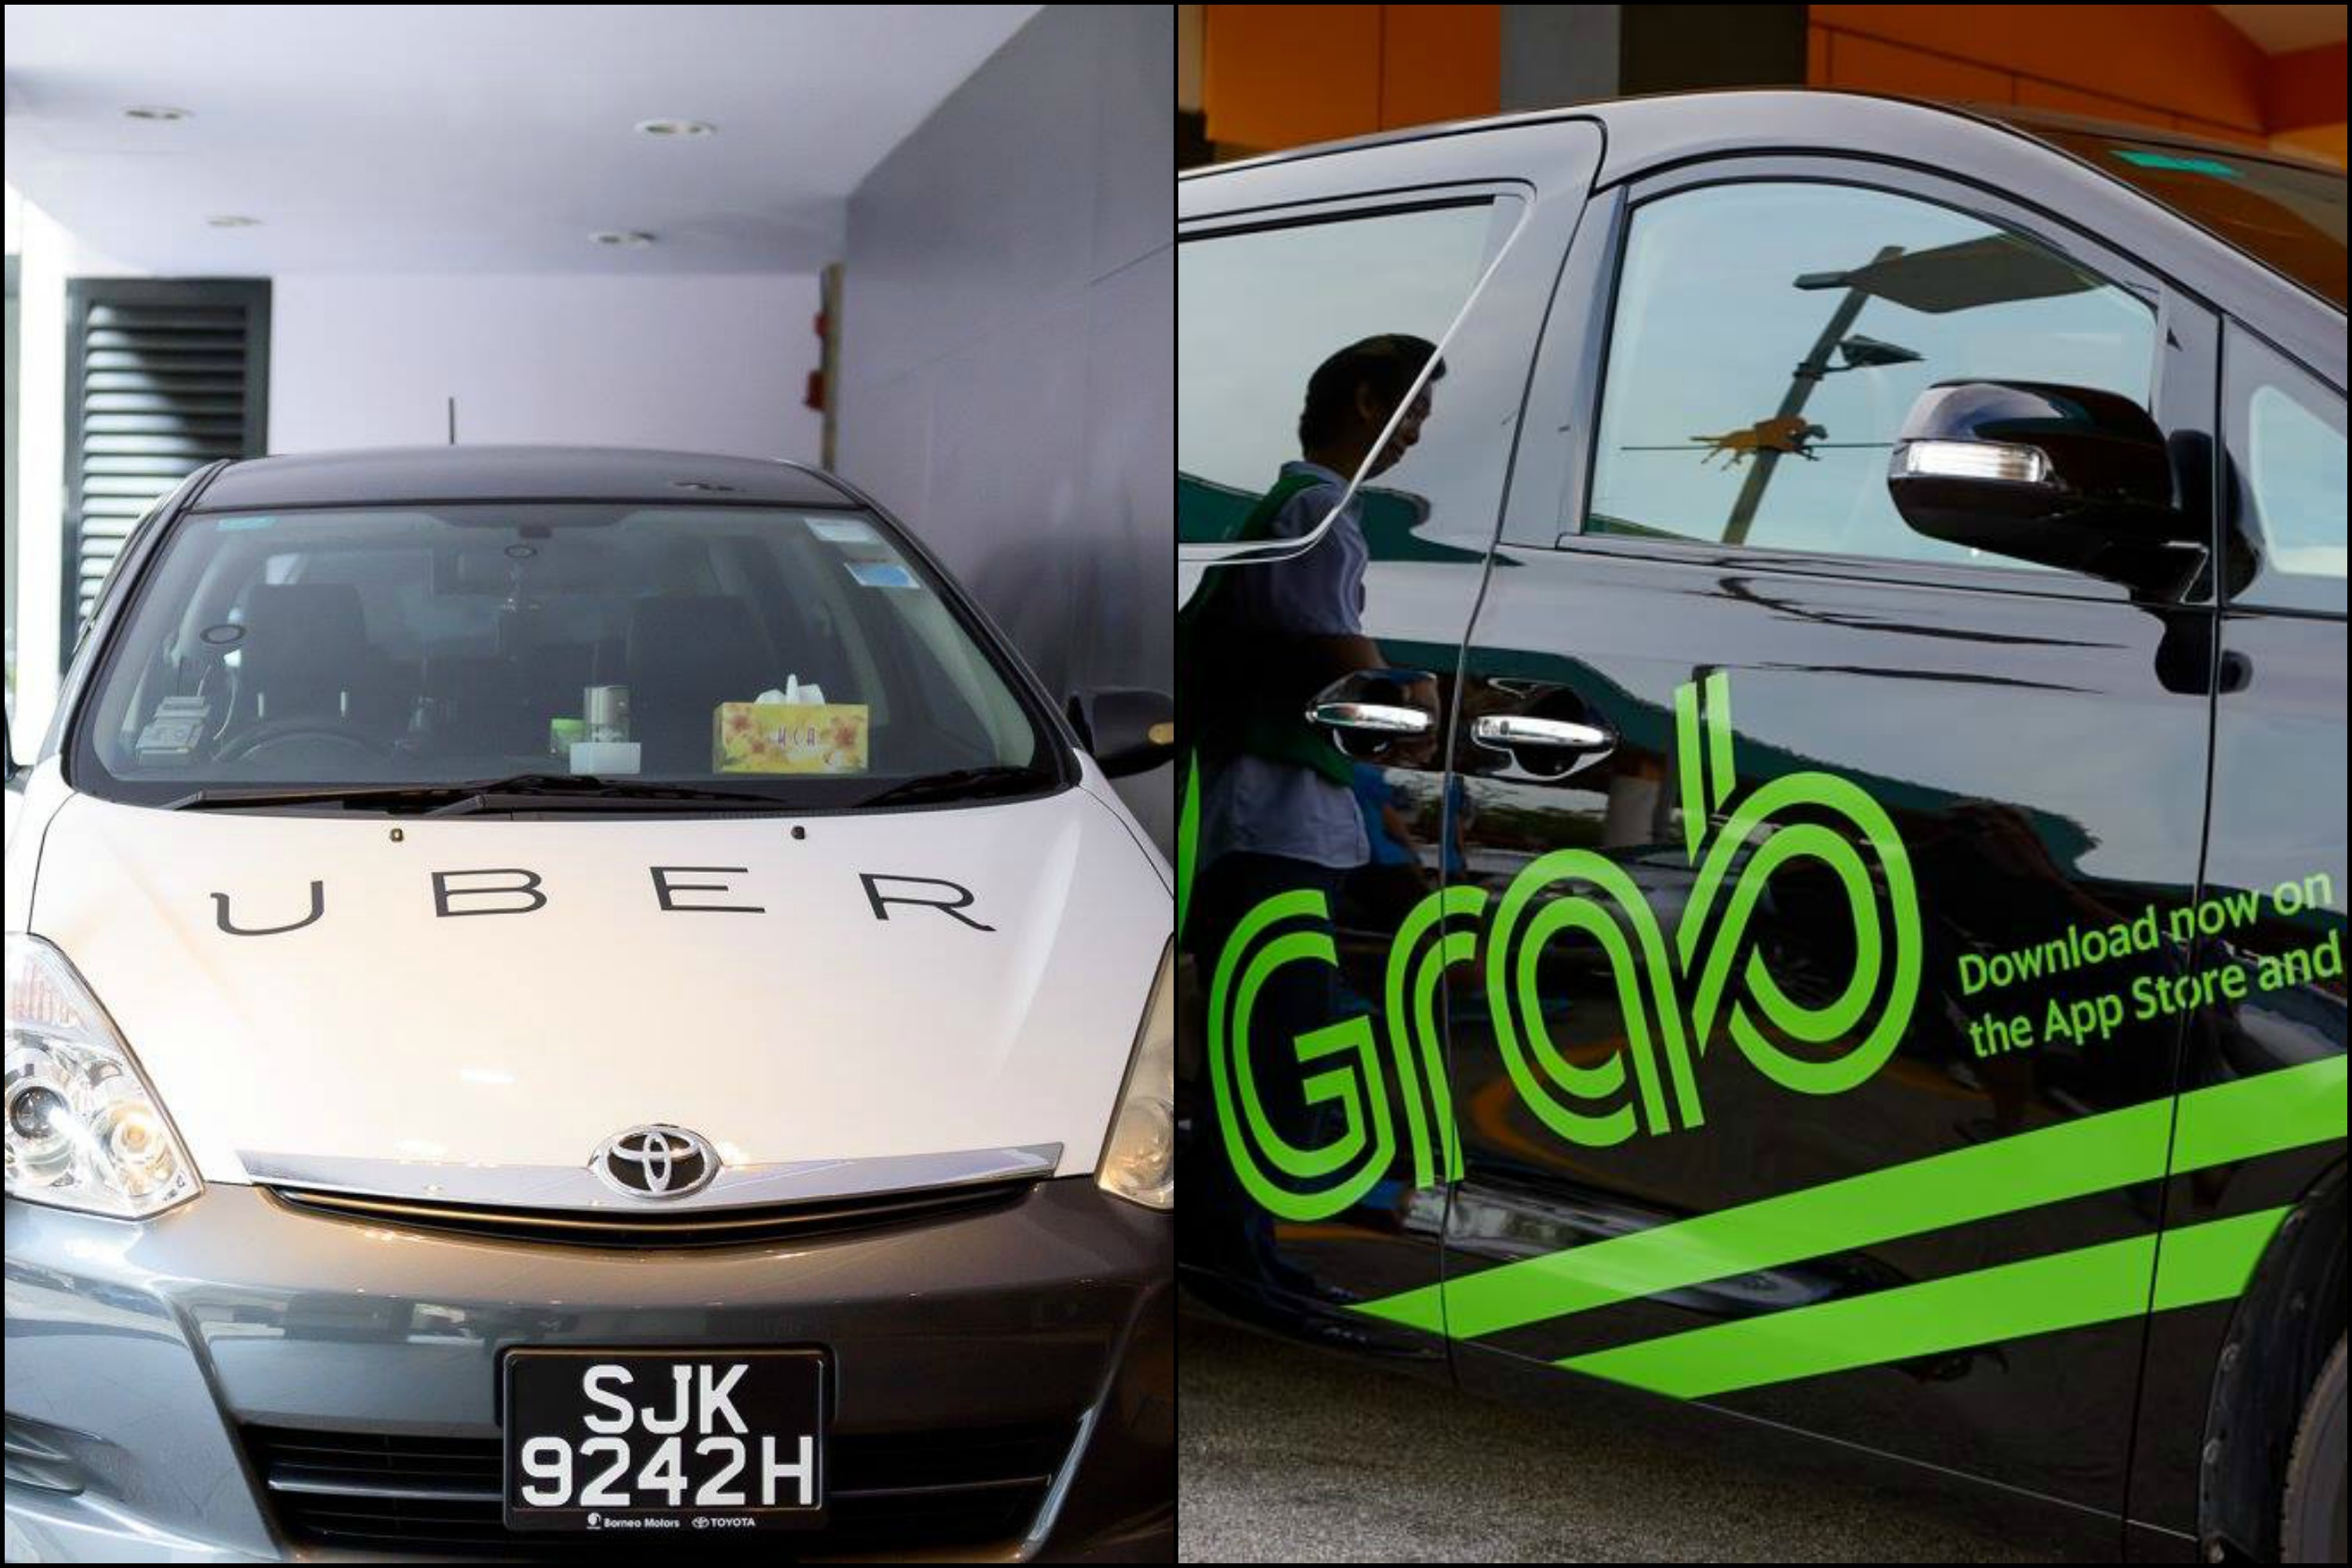 Photos from Uber and Grab's Facebook page